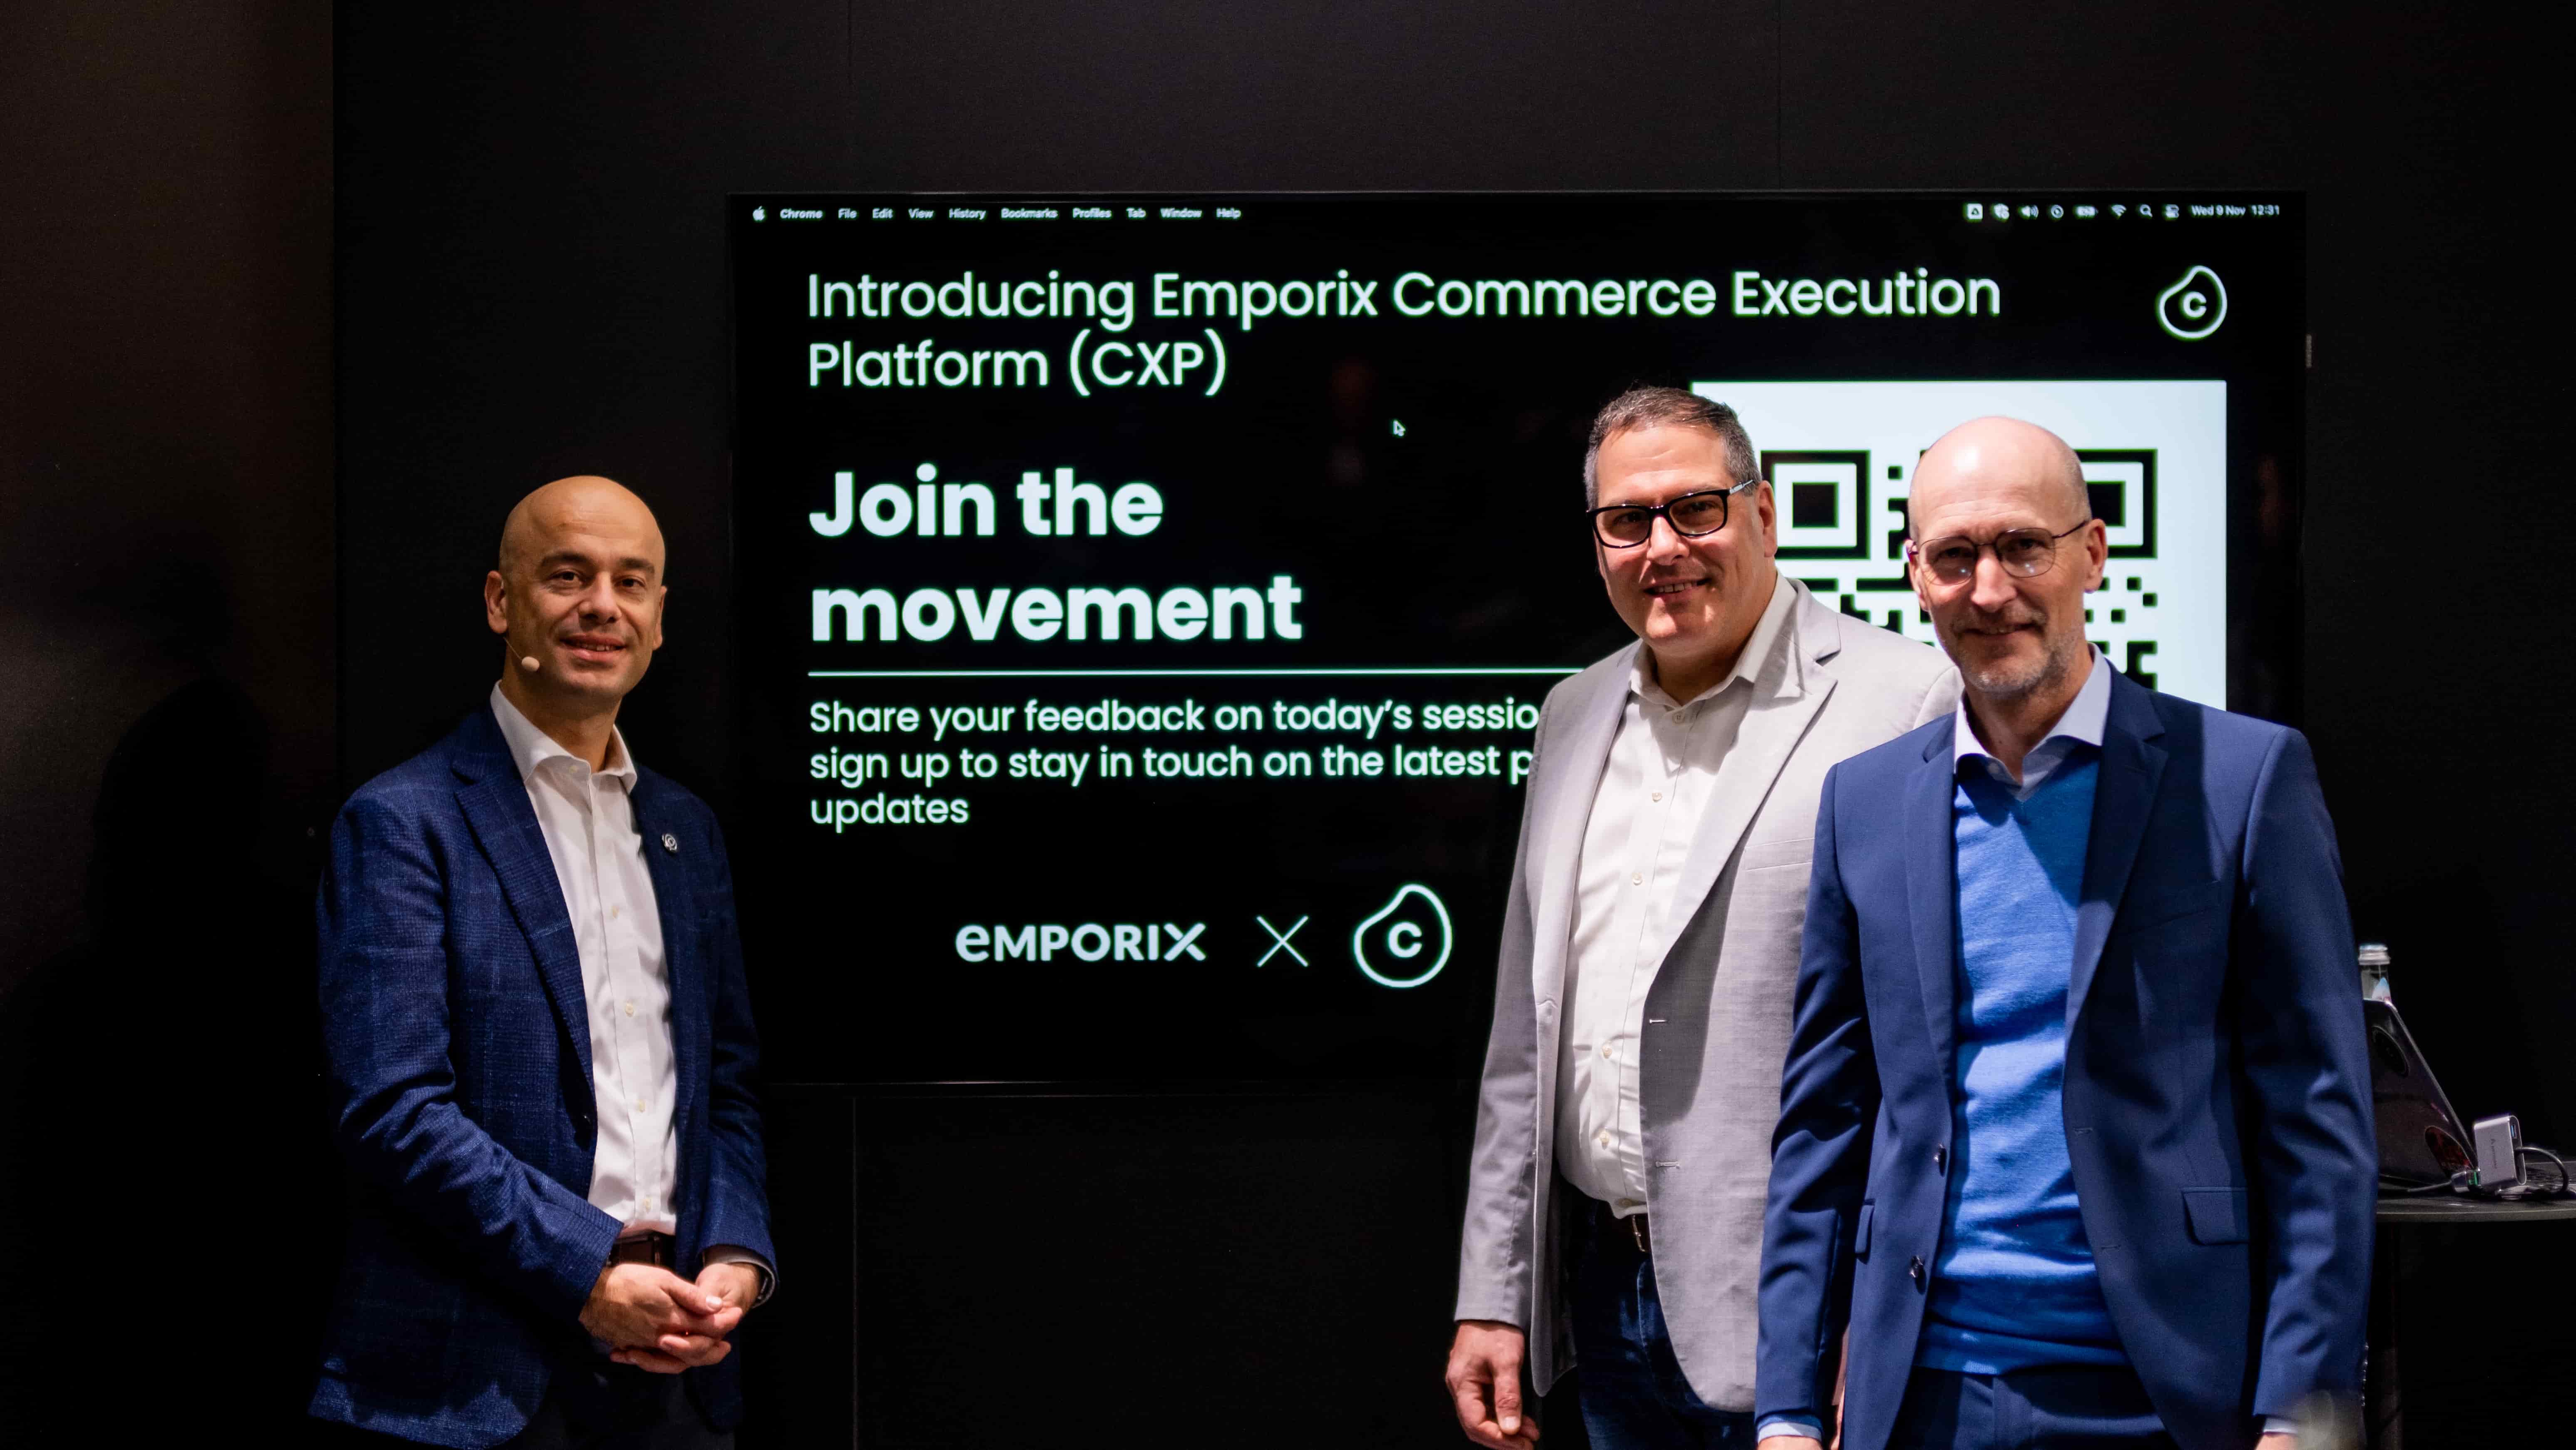 New Commerce Execution Platform (CXP) launched at Celosphere 2022 in partnership with Celonis